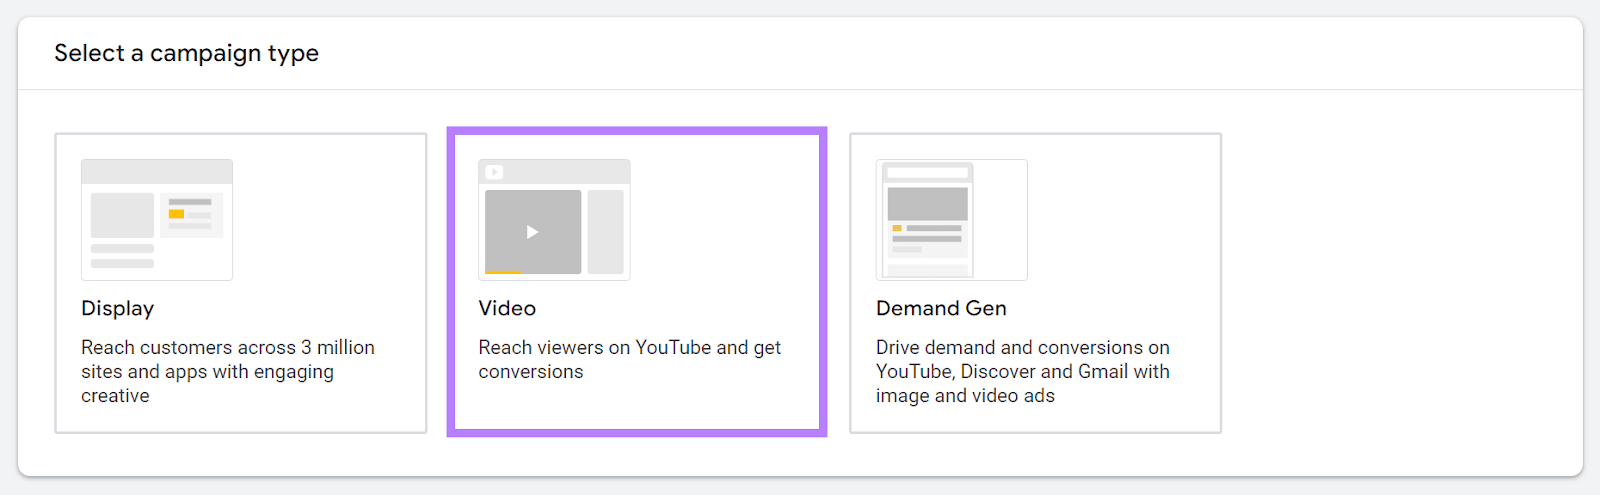 "Video" option selected under "Select a campaign type" section